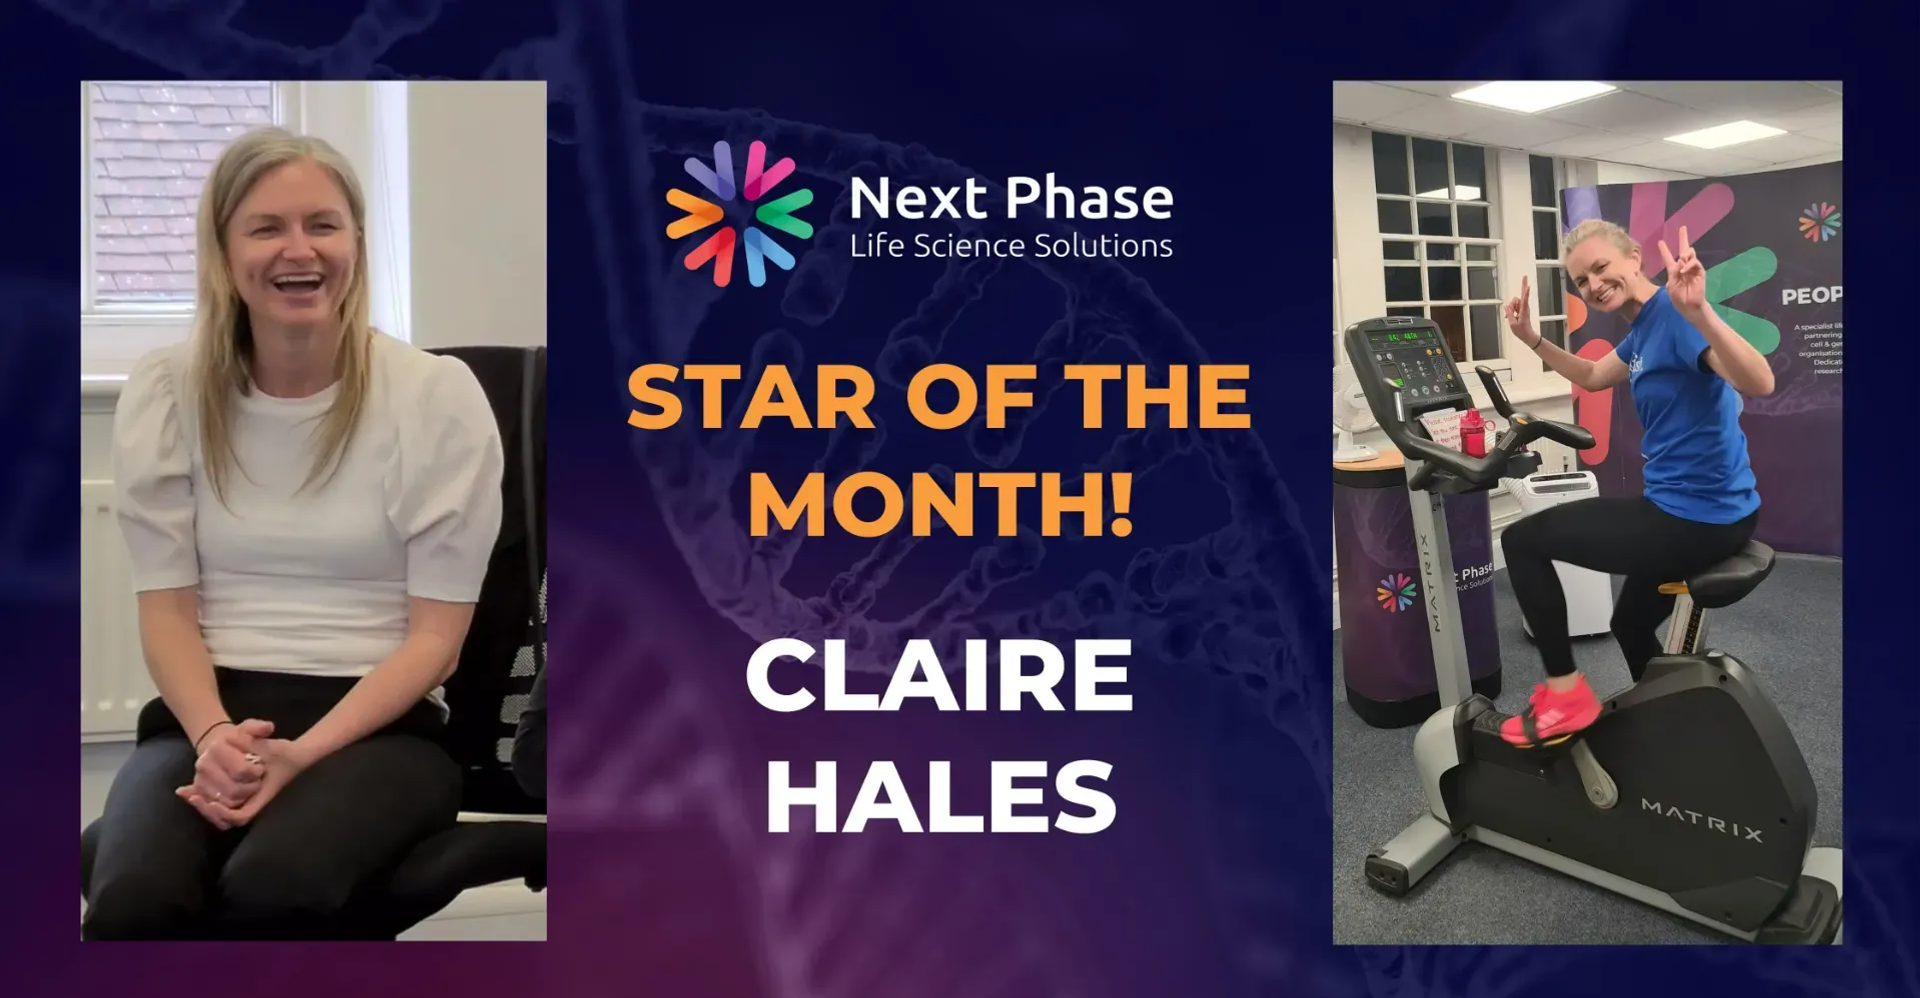 Claire Hales was voted star of the month at Next Phase in August 2022. Claire works hard in managing our contractors and setting up contracts for recruiting consultancy staff into our life science clients